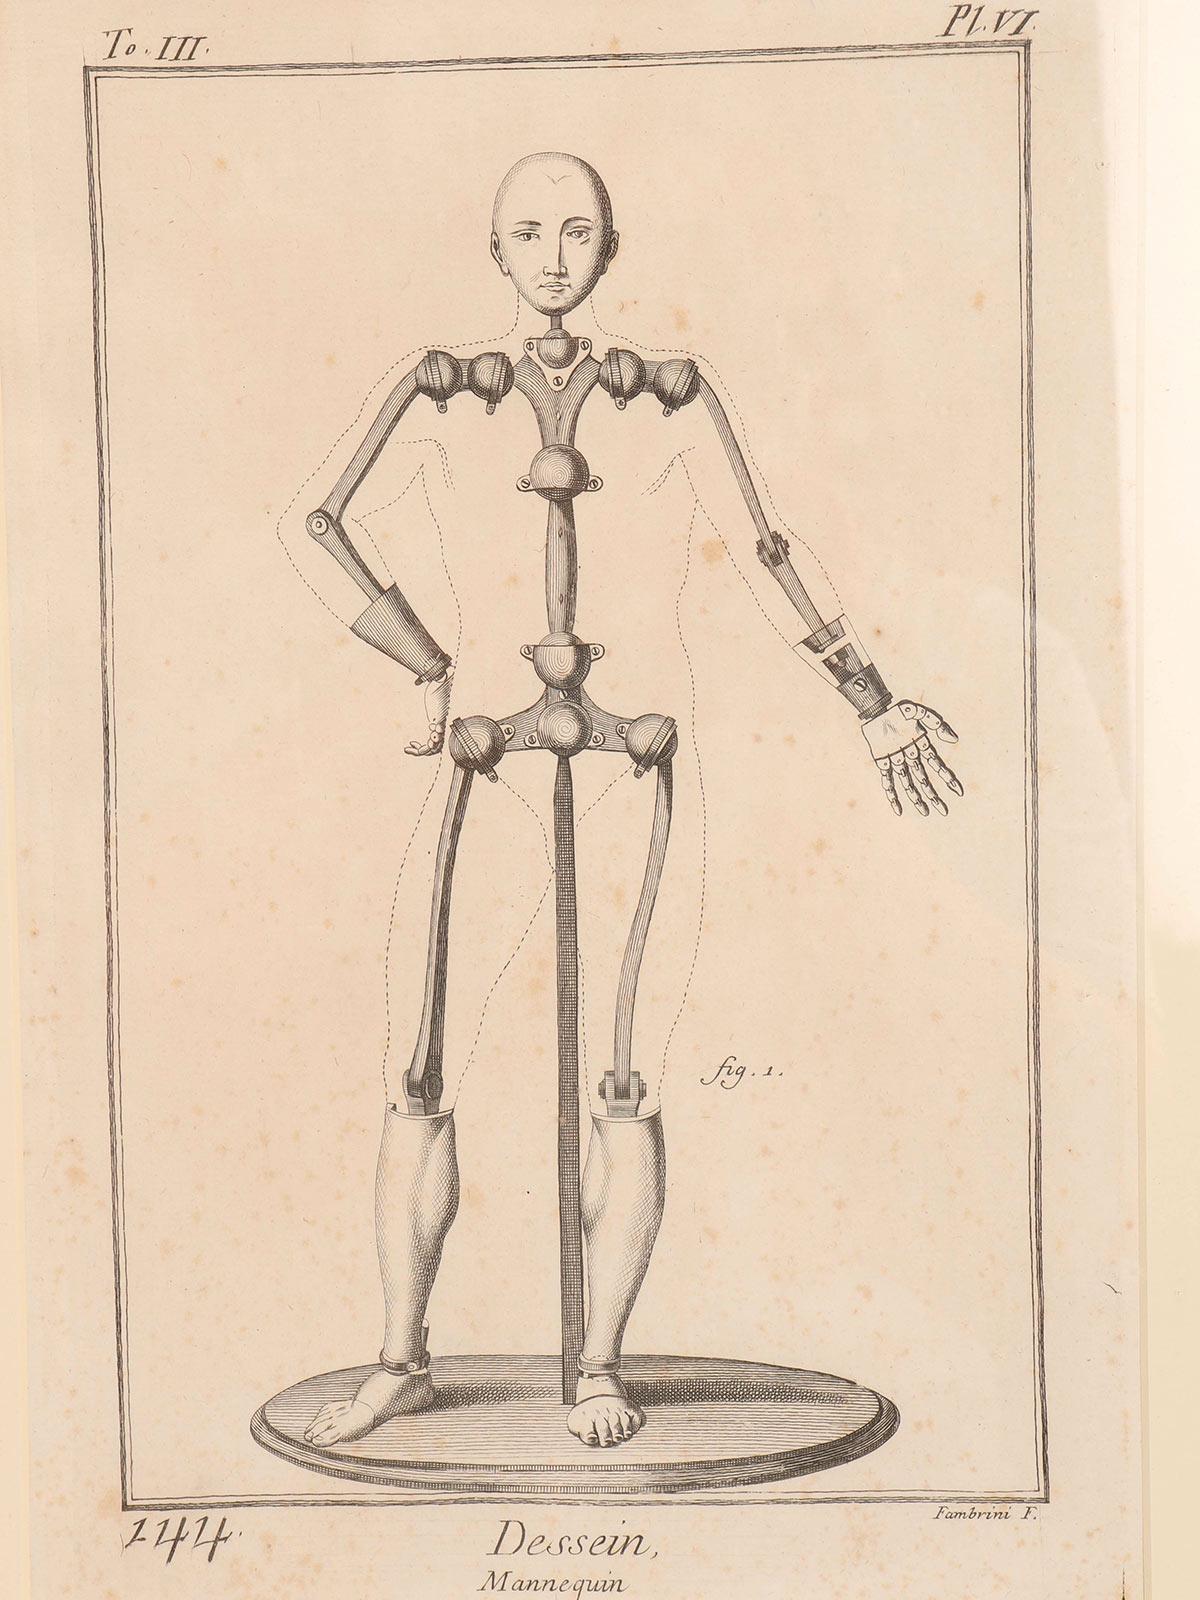 Print is taken from a drawing of an articulated dummy by F. Fambrini, France, 1890 ca.